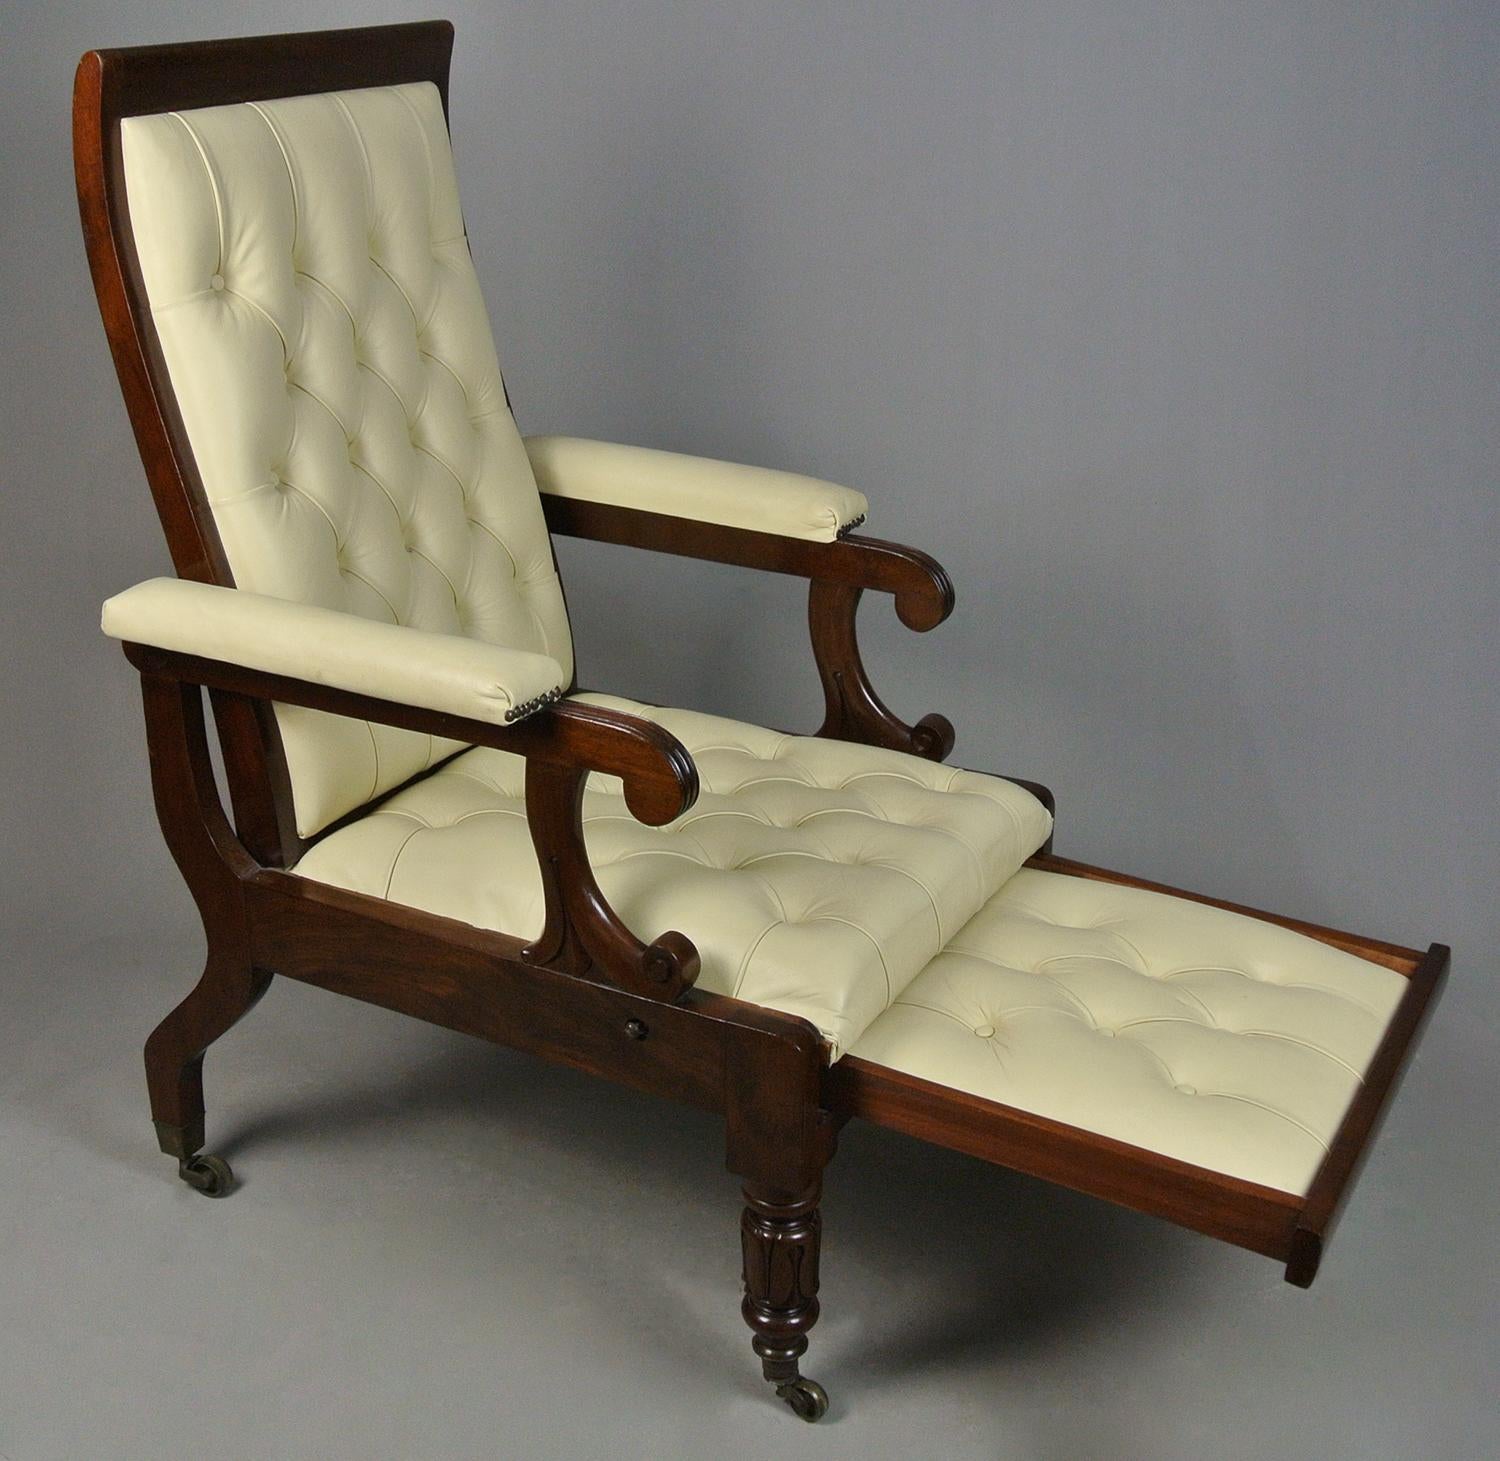 This beautiful reclining chair was made by Robert Daws, an English fine furniture maker who worked at 17 Margaret Street, Cavendish Square, London between 1820 and 1839.

He first patented his ‘improved recumbent chair’ in 1827 and this lovely